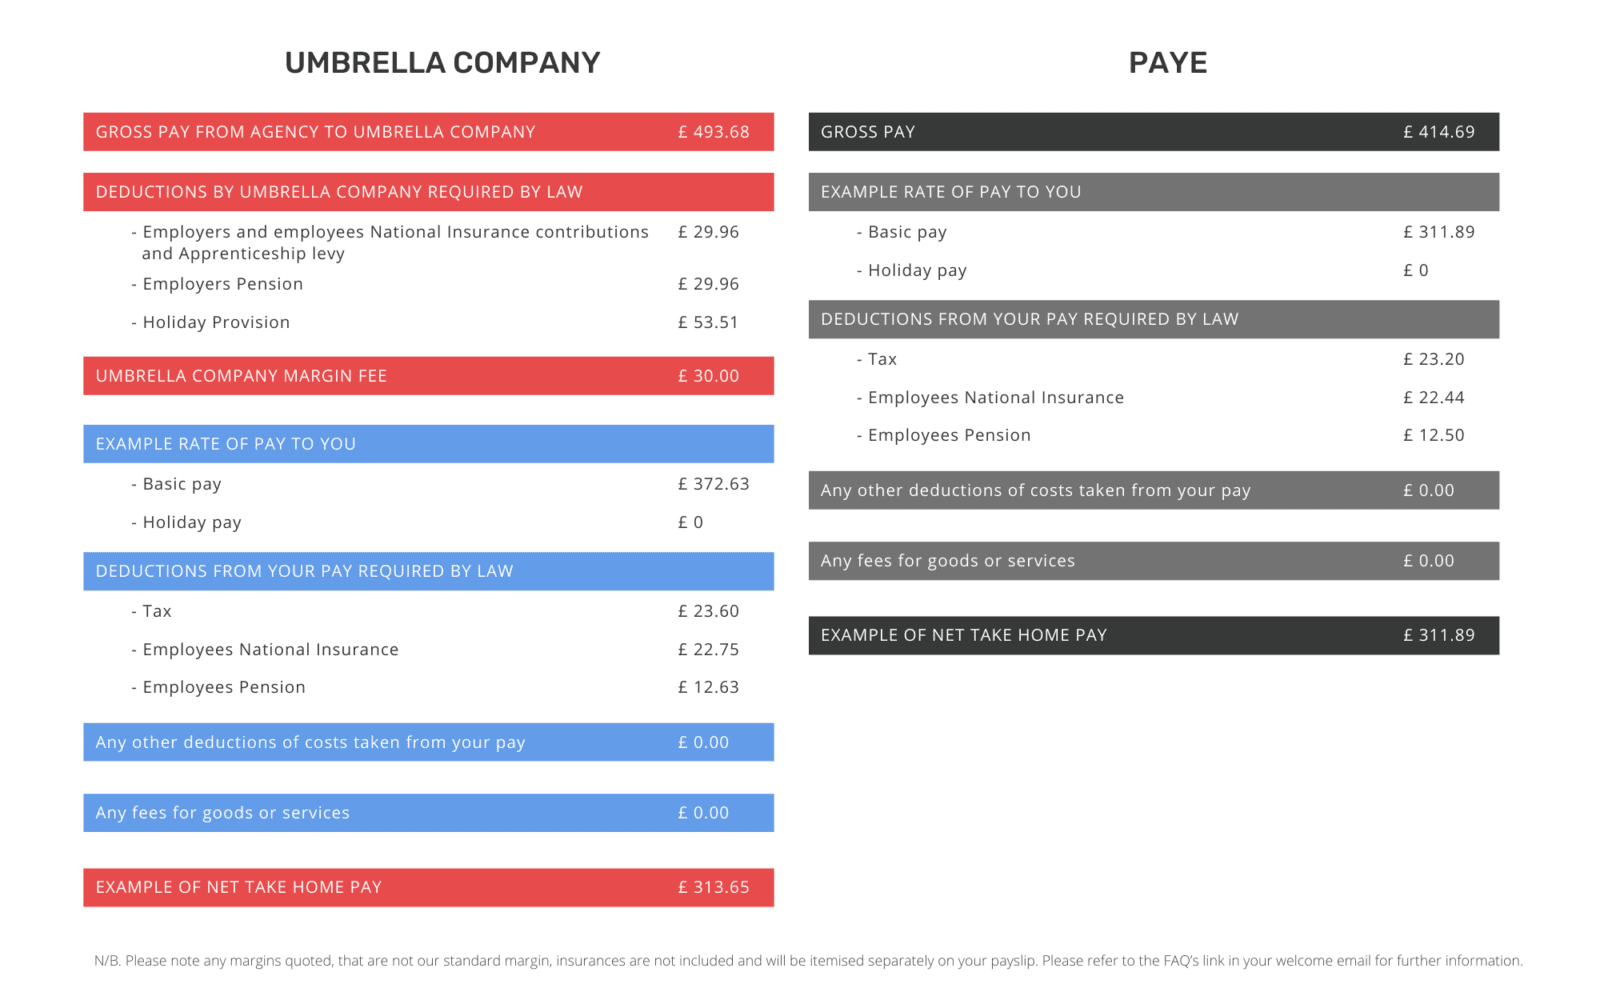 pay calculation example with umbrella company and PAYE